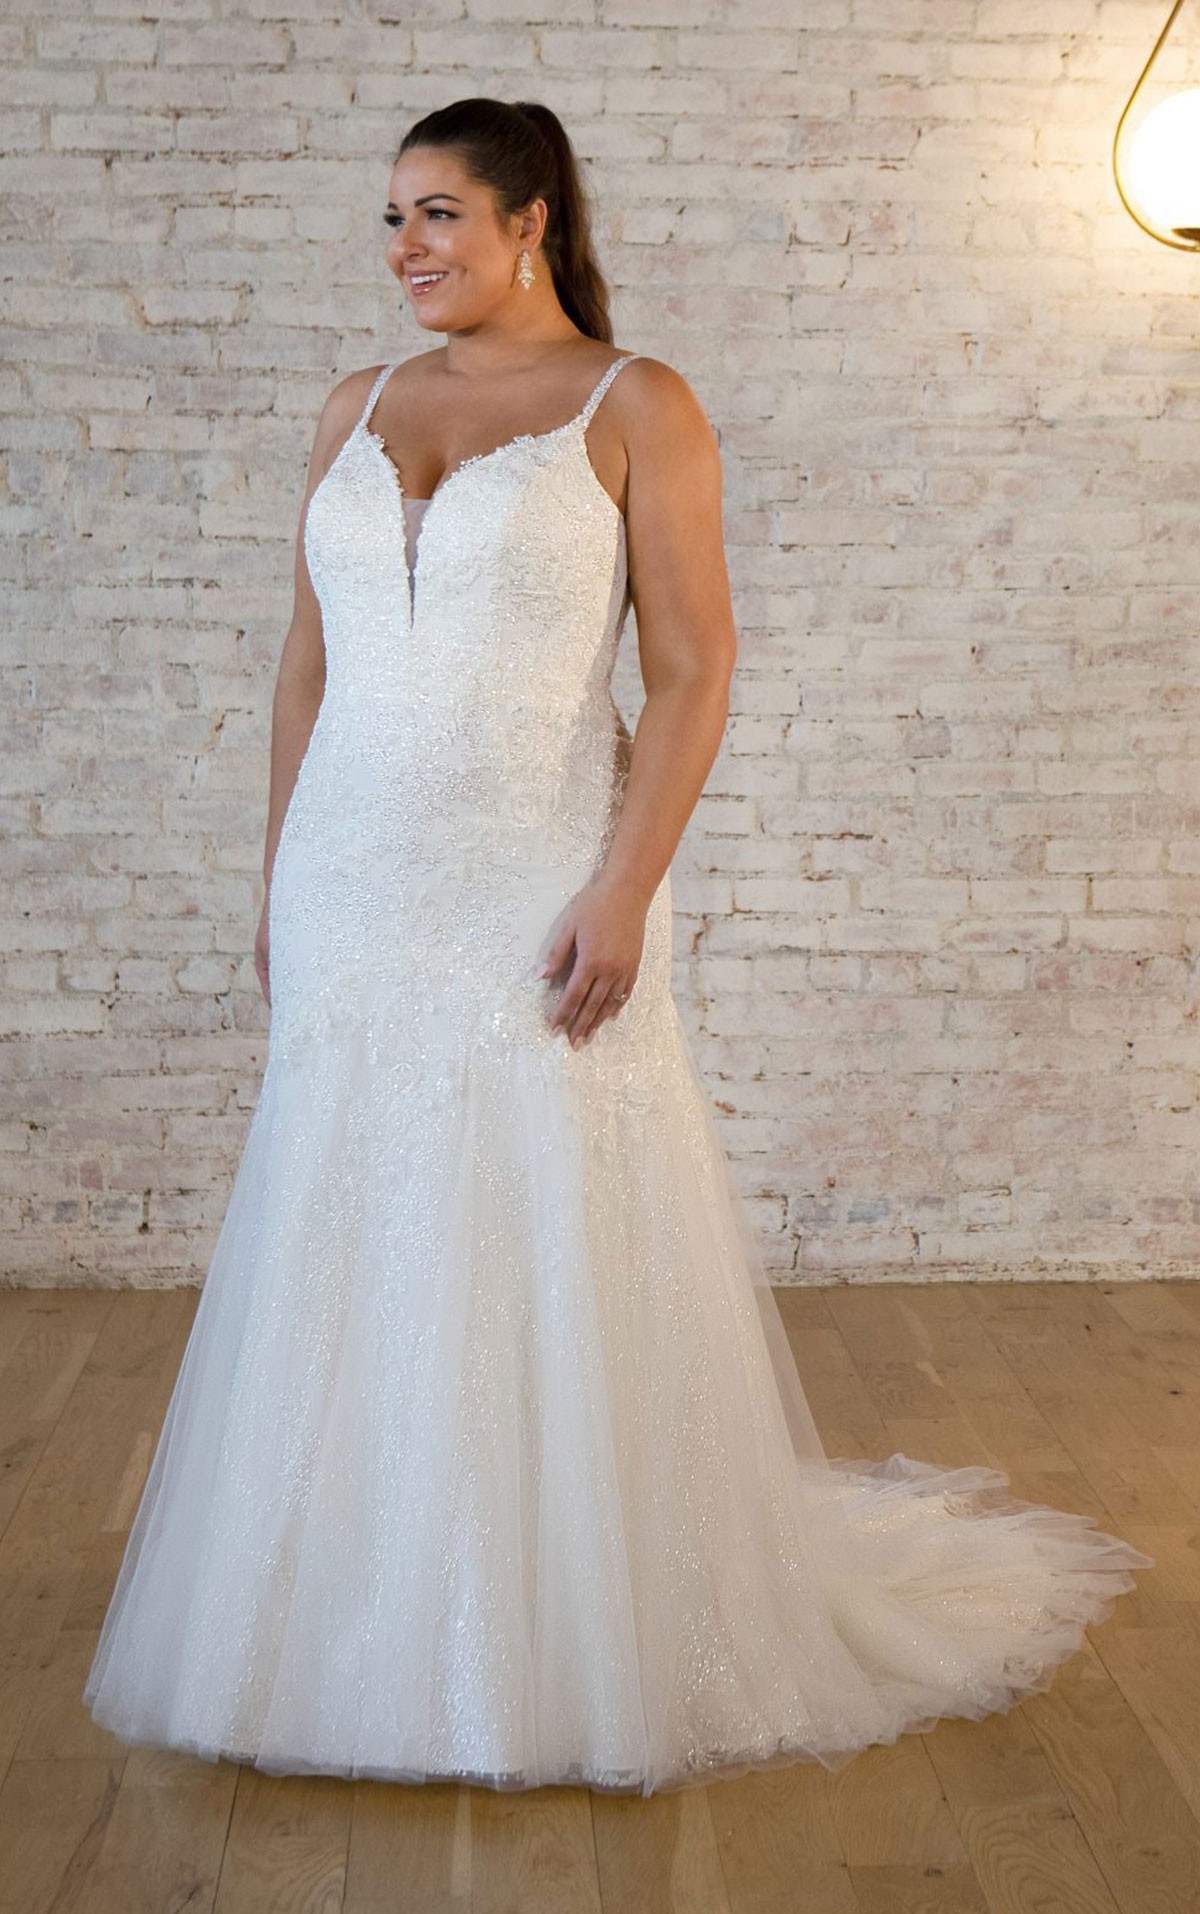 7479 - Anastasia Size 18 - Stella York 7479 Beautiful beaded lace fit and flare dress with straps. Plus size wedding dress at Blessings Bridal Shop, 3 Loyal Parade, Mill Rise, Westdene, Brighton. East Sussex. BN1 5GG T:01273 505766 E:info@blessingsbridal.co.uk